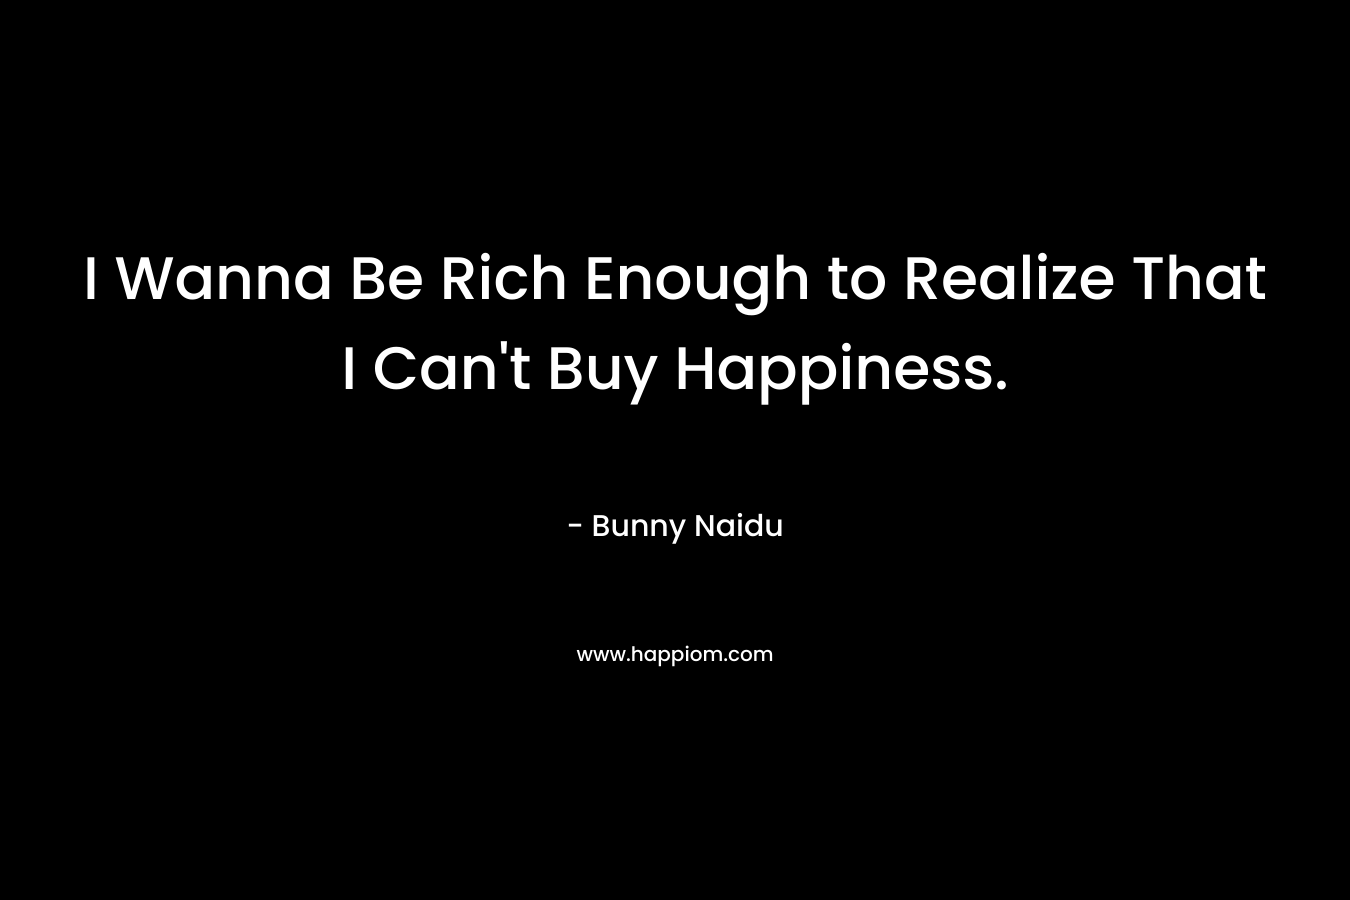 I Wanna Be Rich Enough to Realize That I Can’t Buy Happiness. – Bunny Naidu